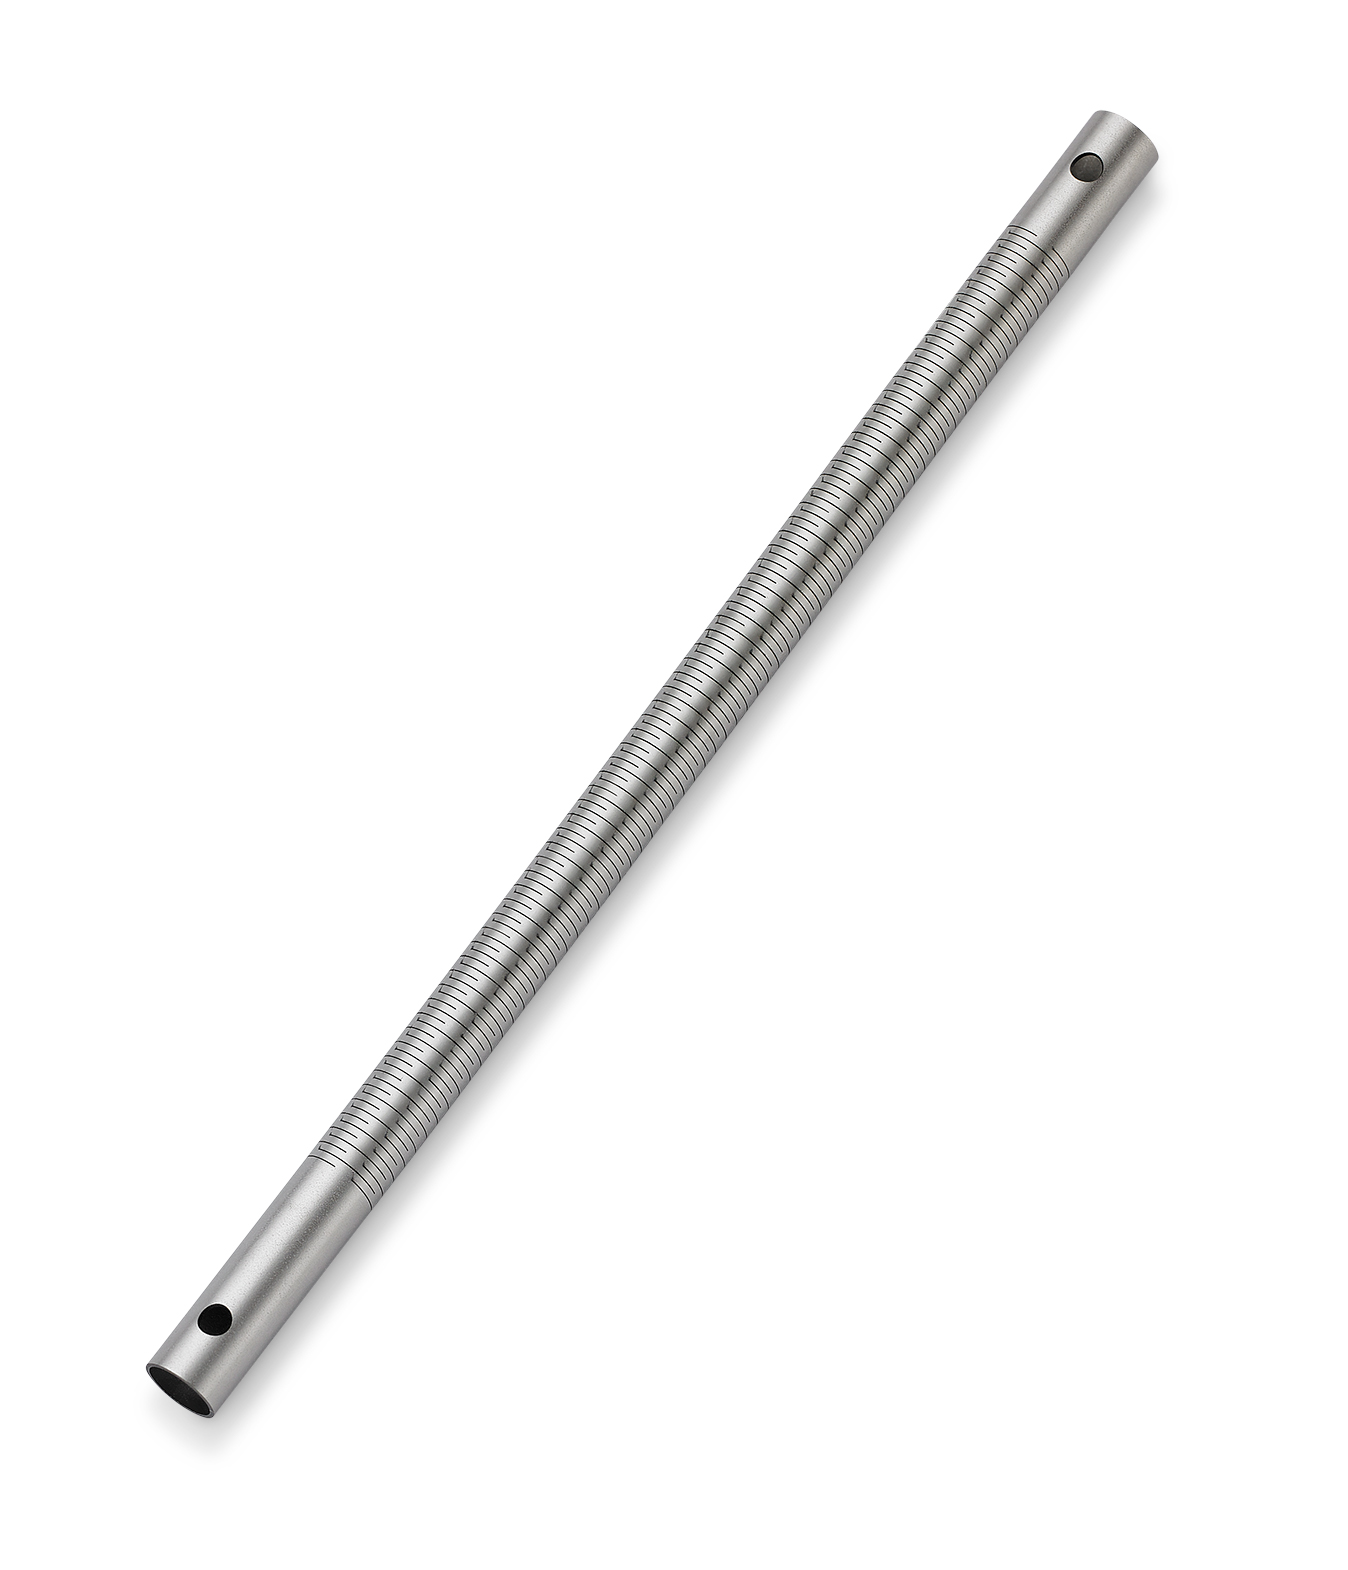 Stainless steel rod component used in a medical device - Nextern